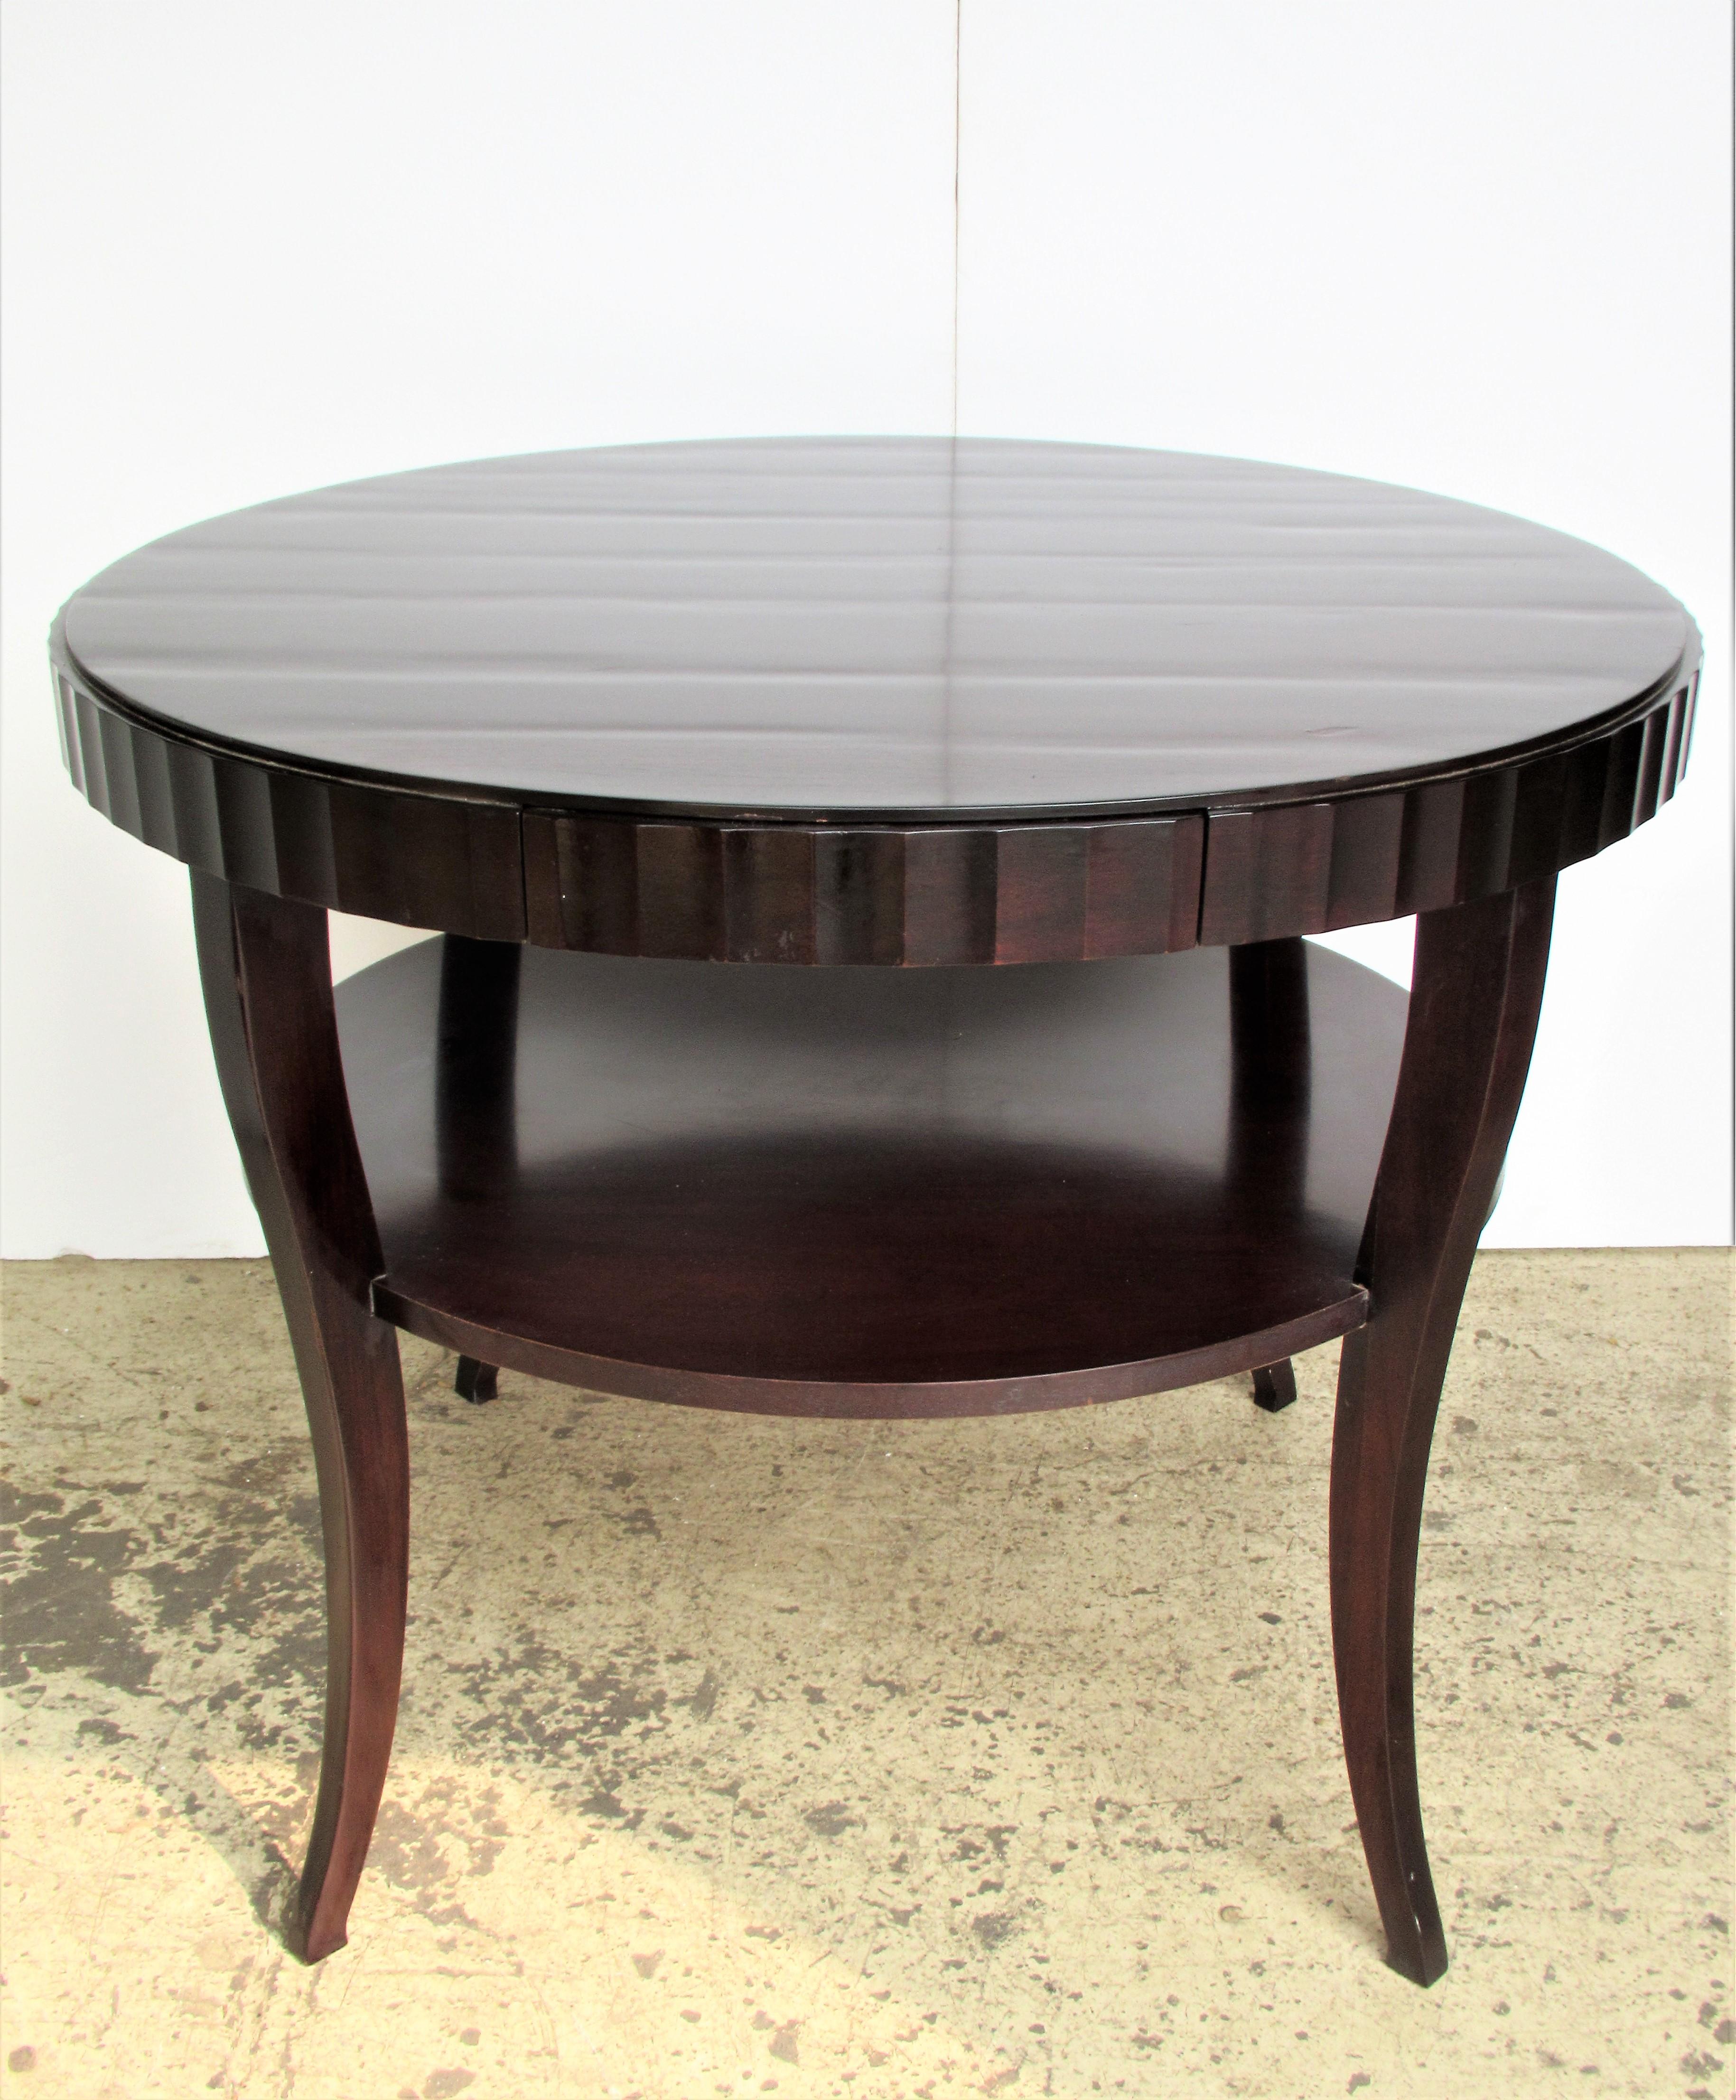 In the 1930s French Art Deco style a Barbara Barry for Baker Furniture one drawer round center table with nicely tapered legs and fluted design apron. The top with a ripple like appearance that gives beautiful dimension to the rich mahogany wood.